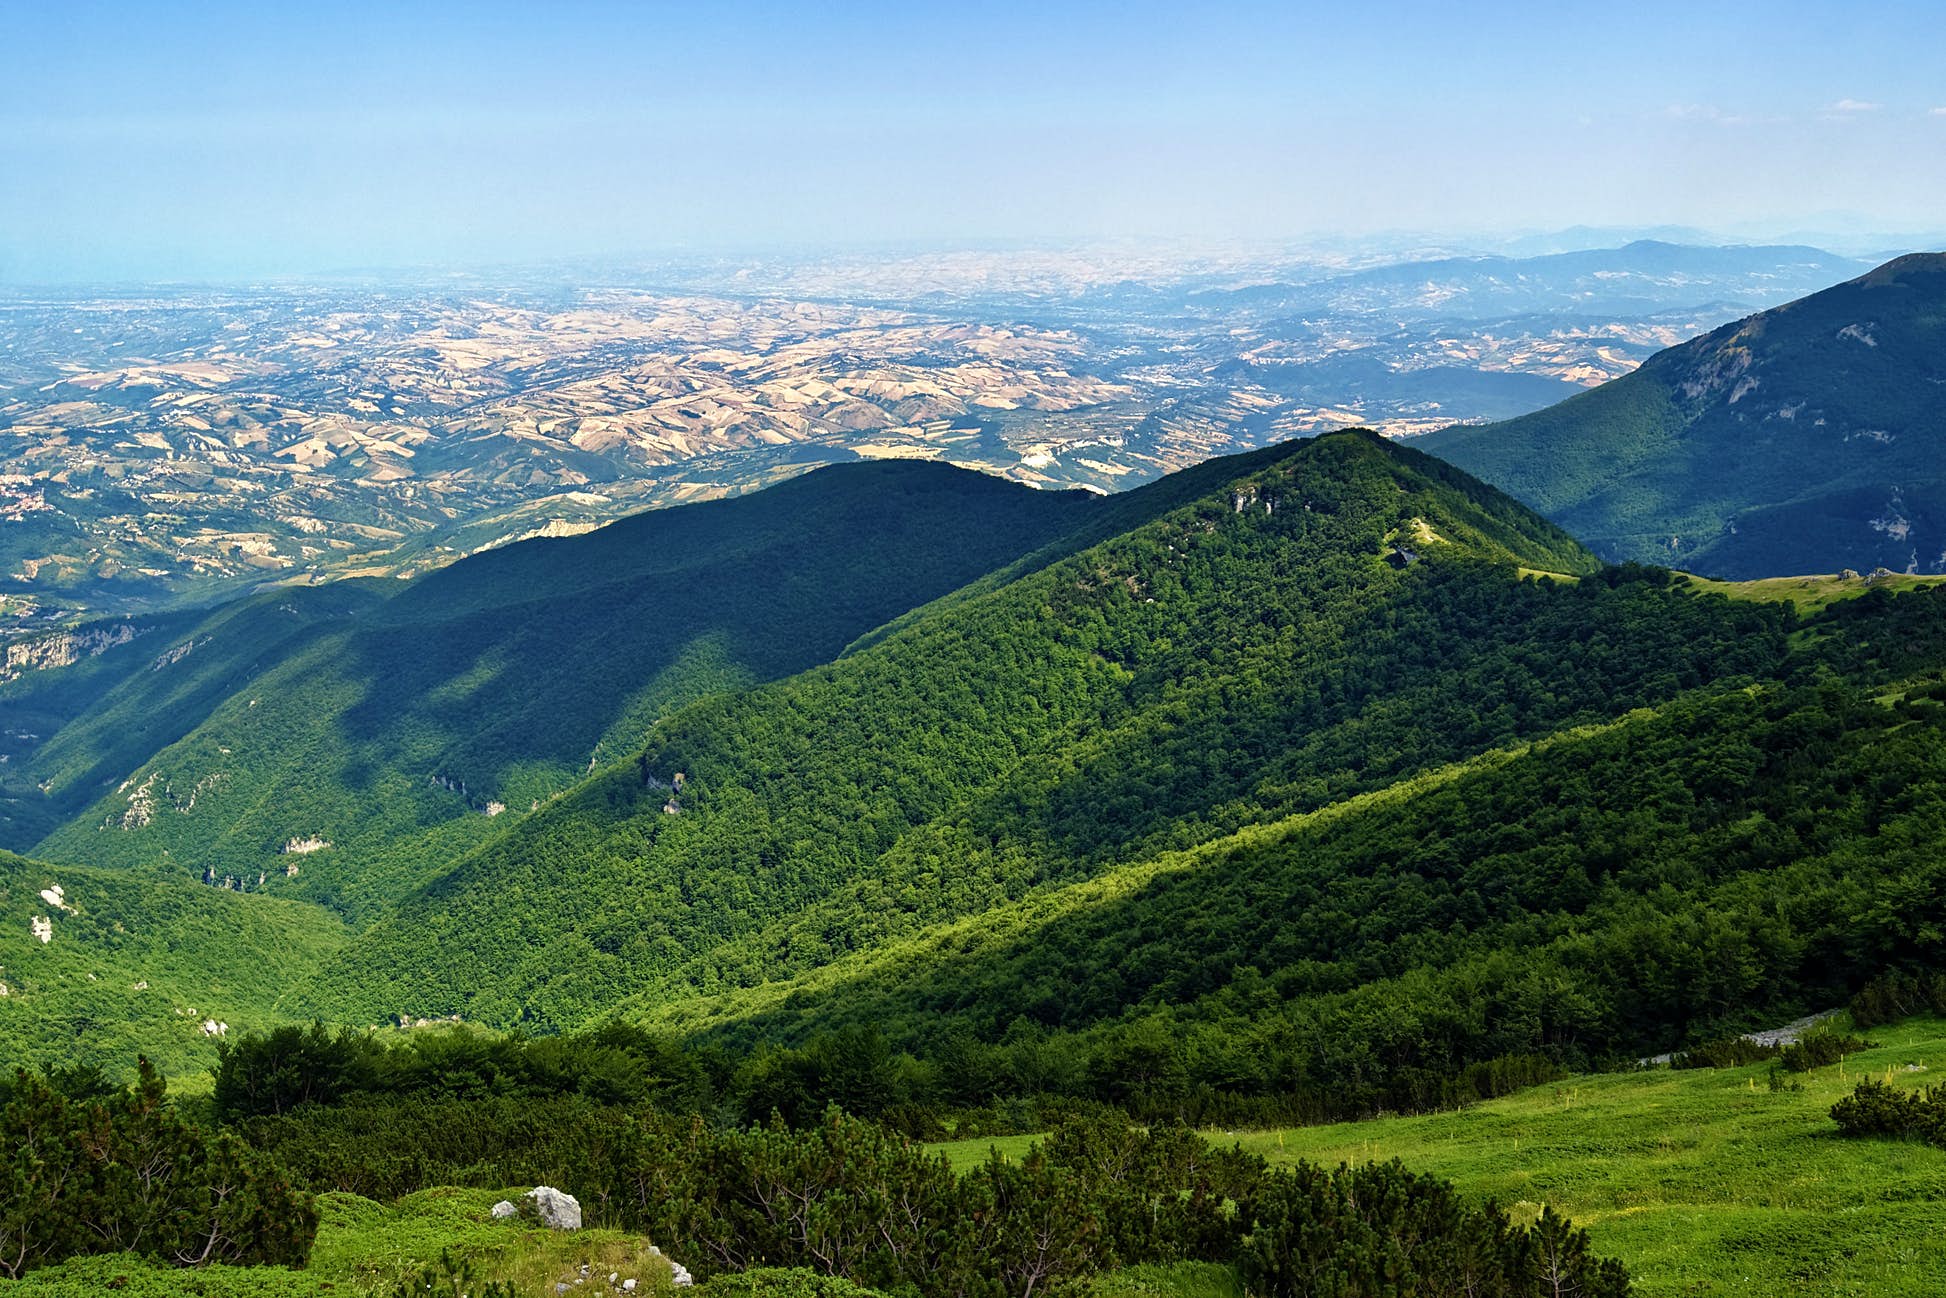 Apennines Mountains (Italy) ©Shoot74/Shutterstock